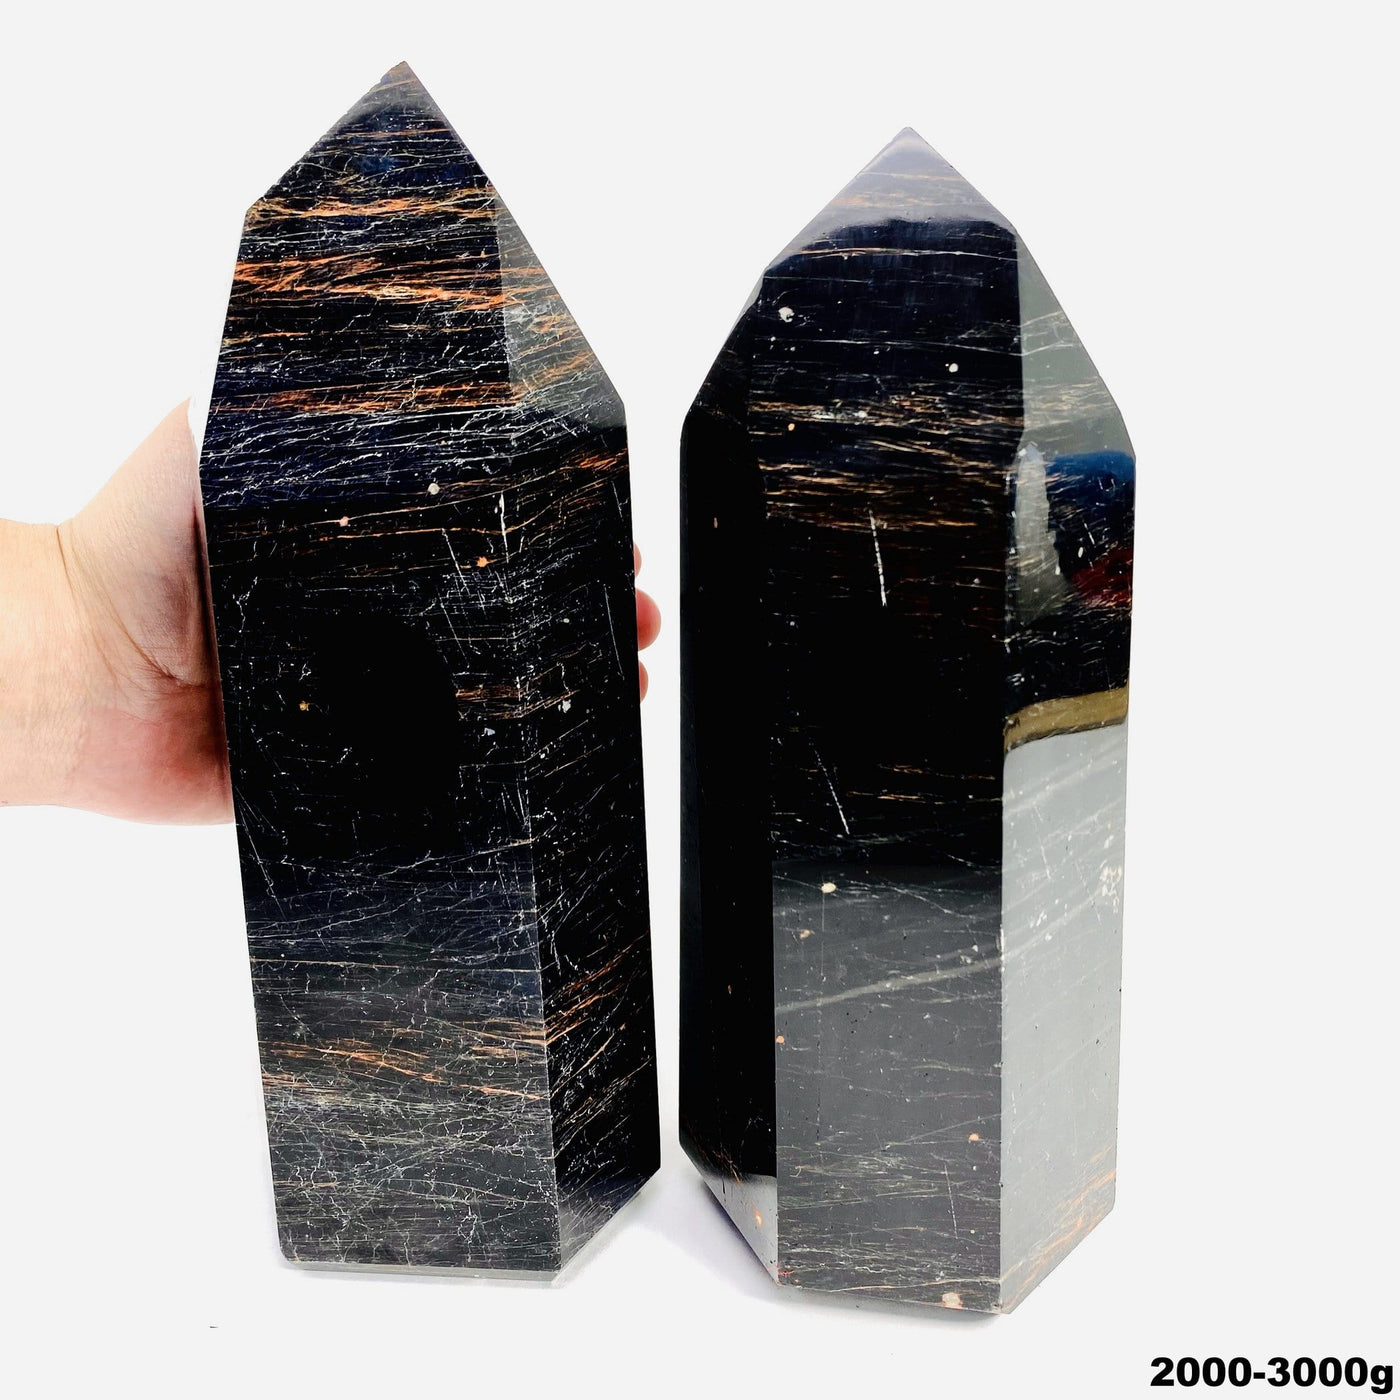 hand behind 2000-3000g black tourmaline with red iron polished points